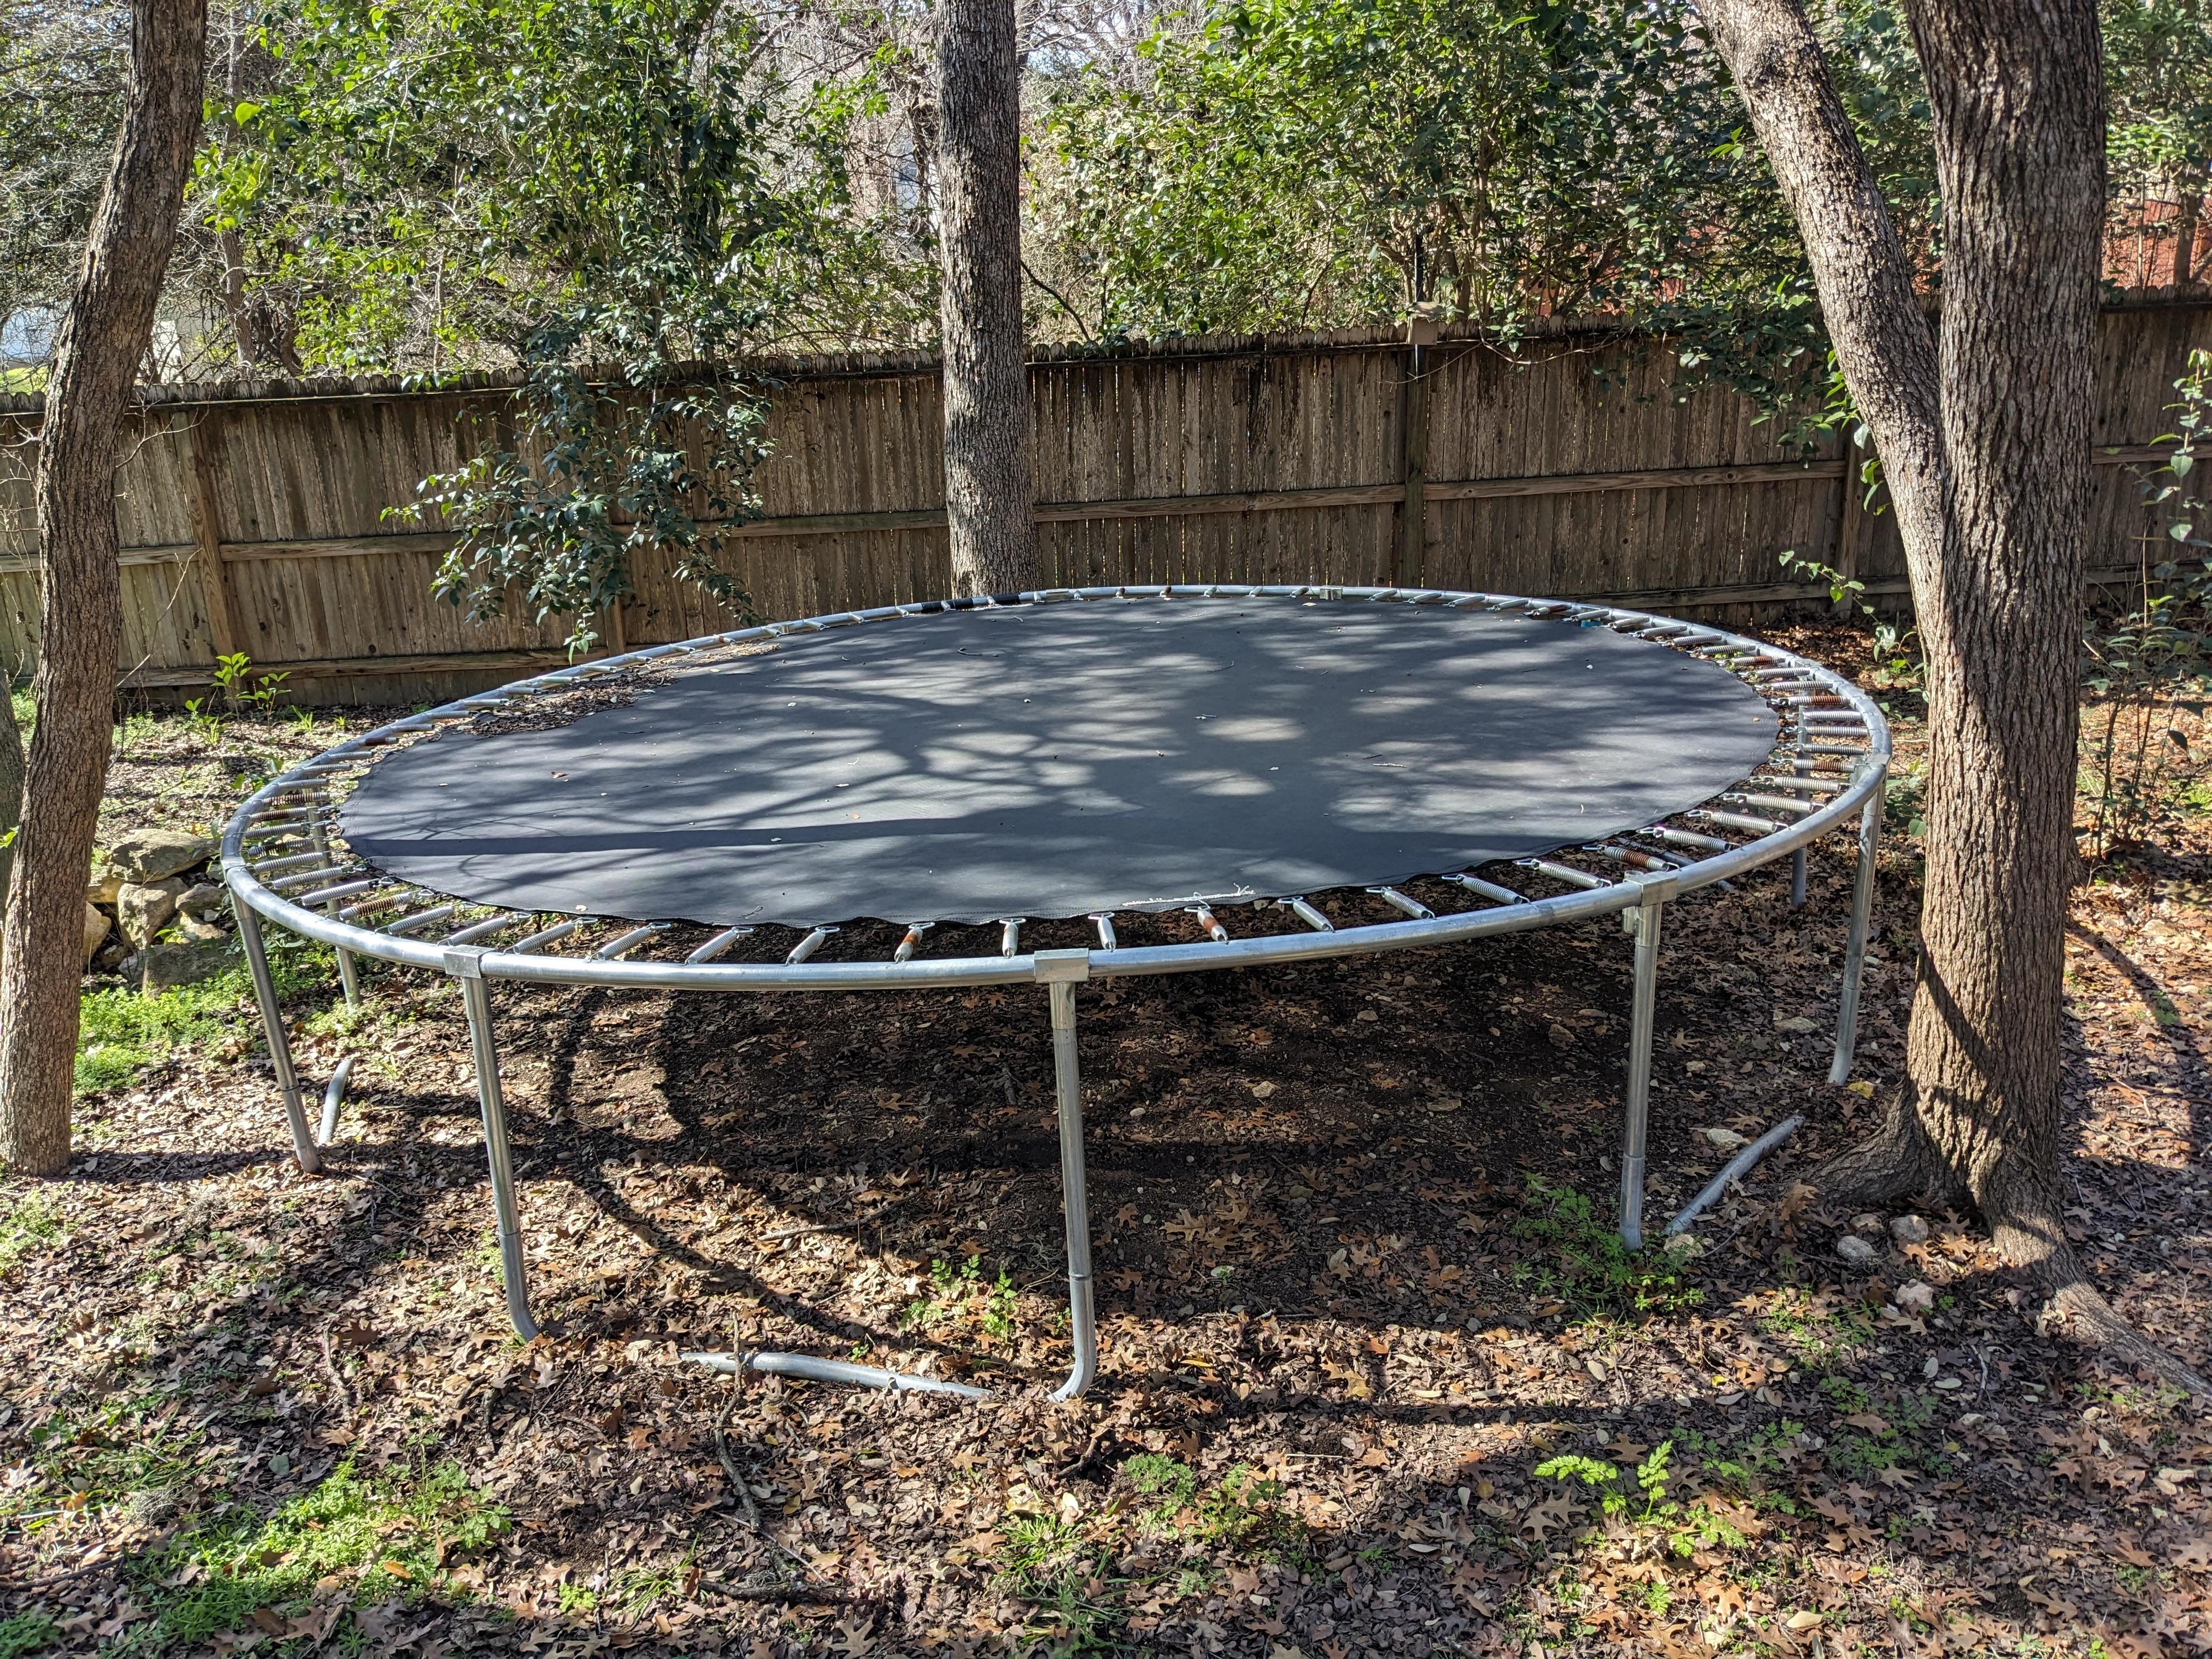 Round trampoline with safety net, set on grass between trees, no people visible